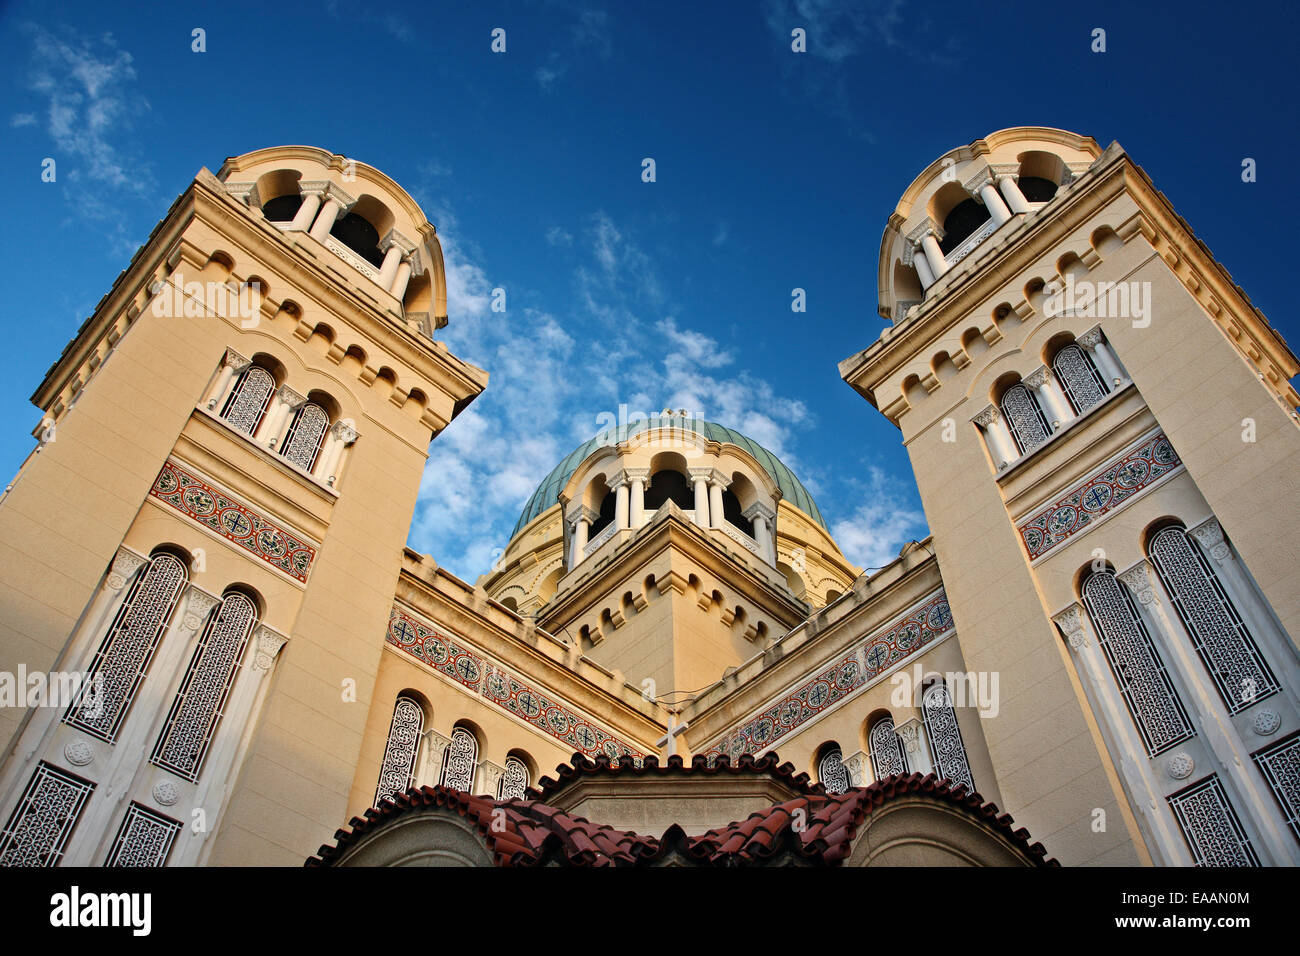 The Cathedral of Agios Andreas ('Saint Andrew'), patron saint of Patras city, Achaia, Peloponnese, Greece. Stock Photo